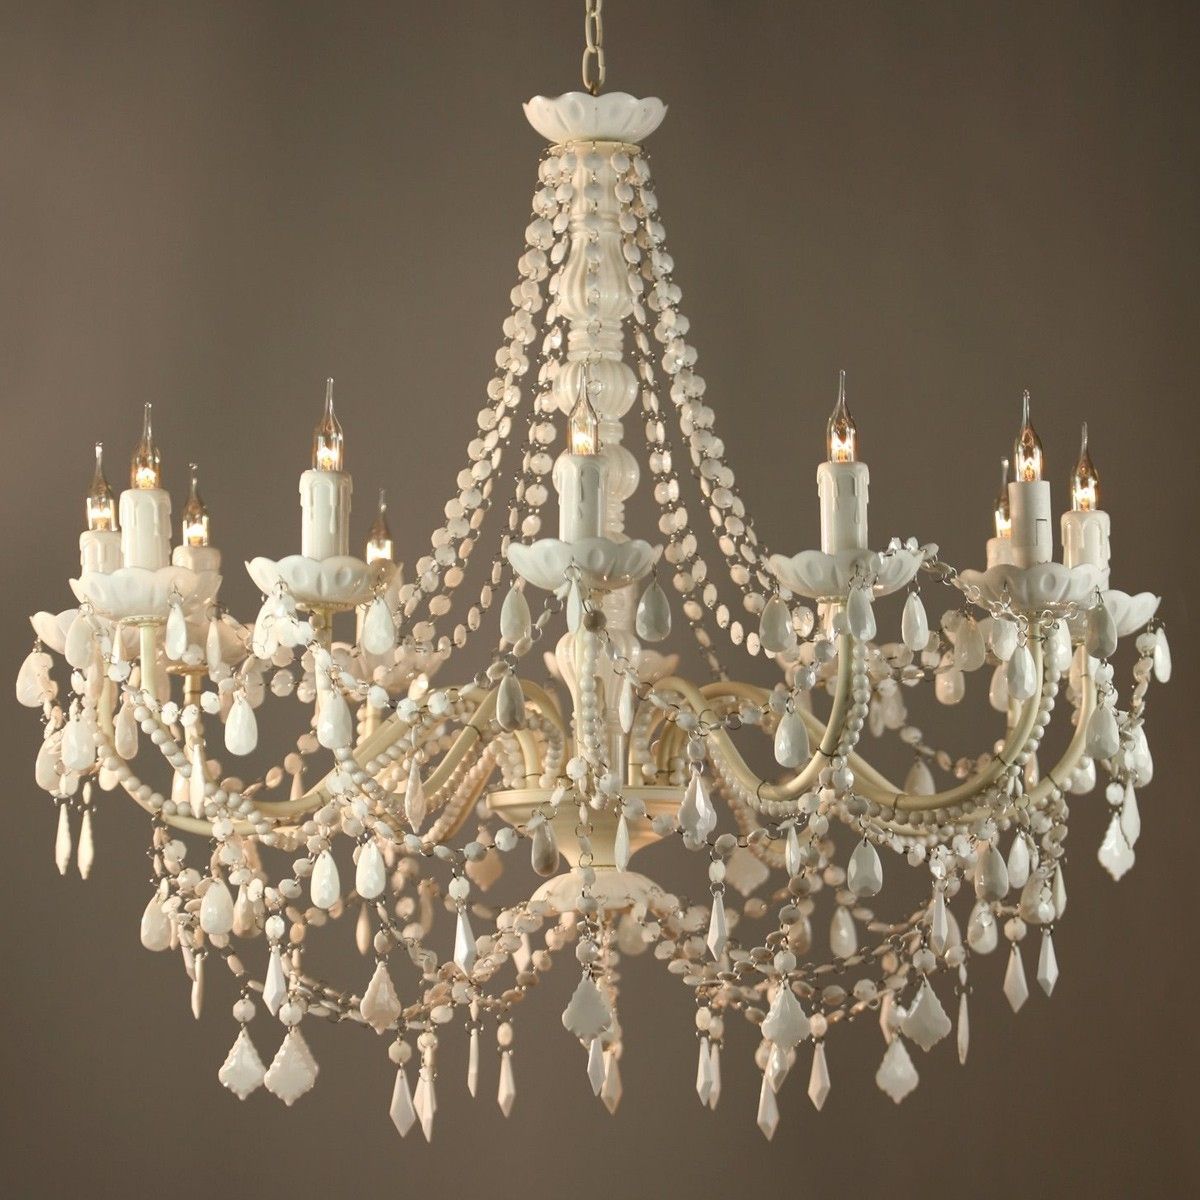 Vintage Style Chandelier In Favorite Antique Chandeliers For Your House (View 1 of 20)